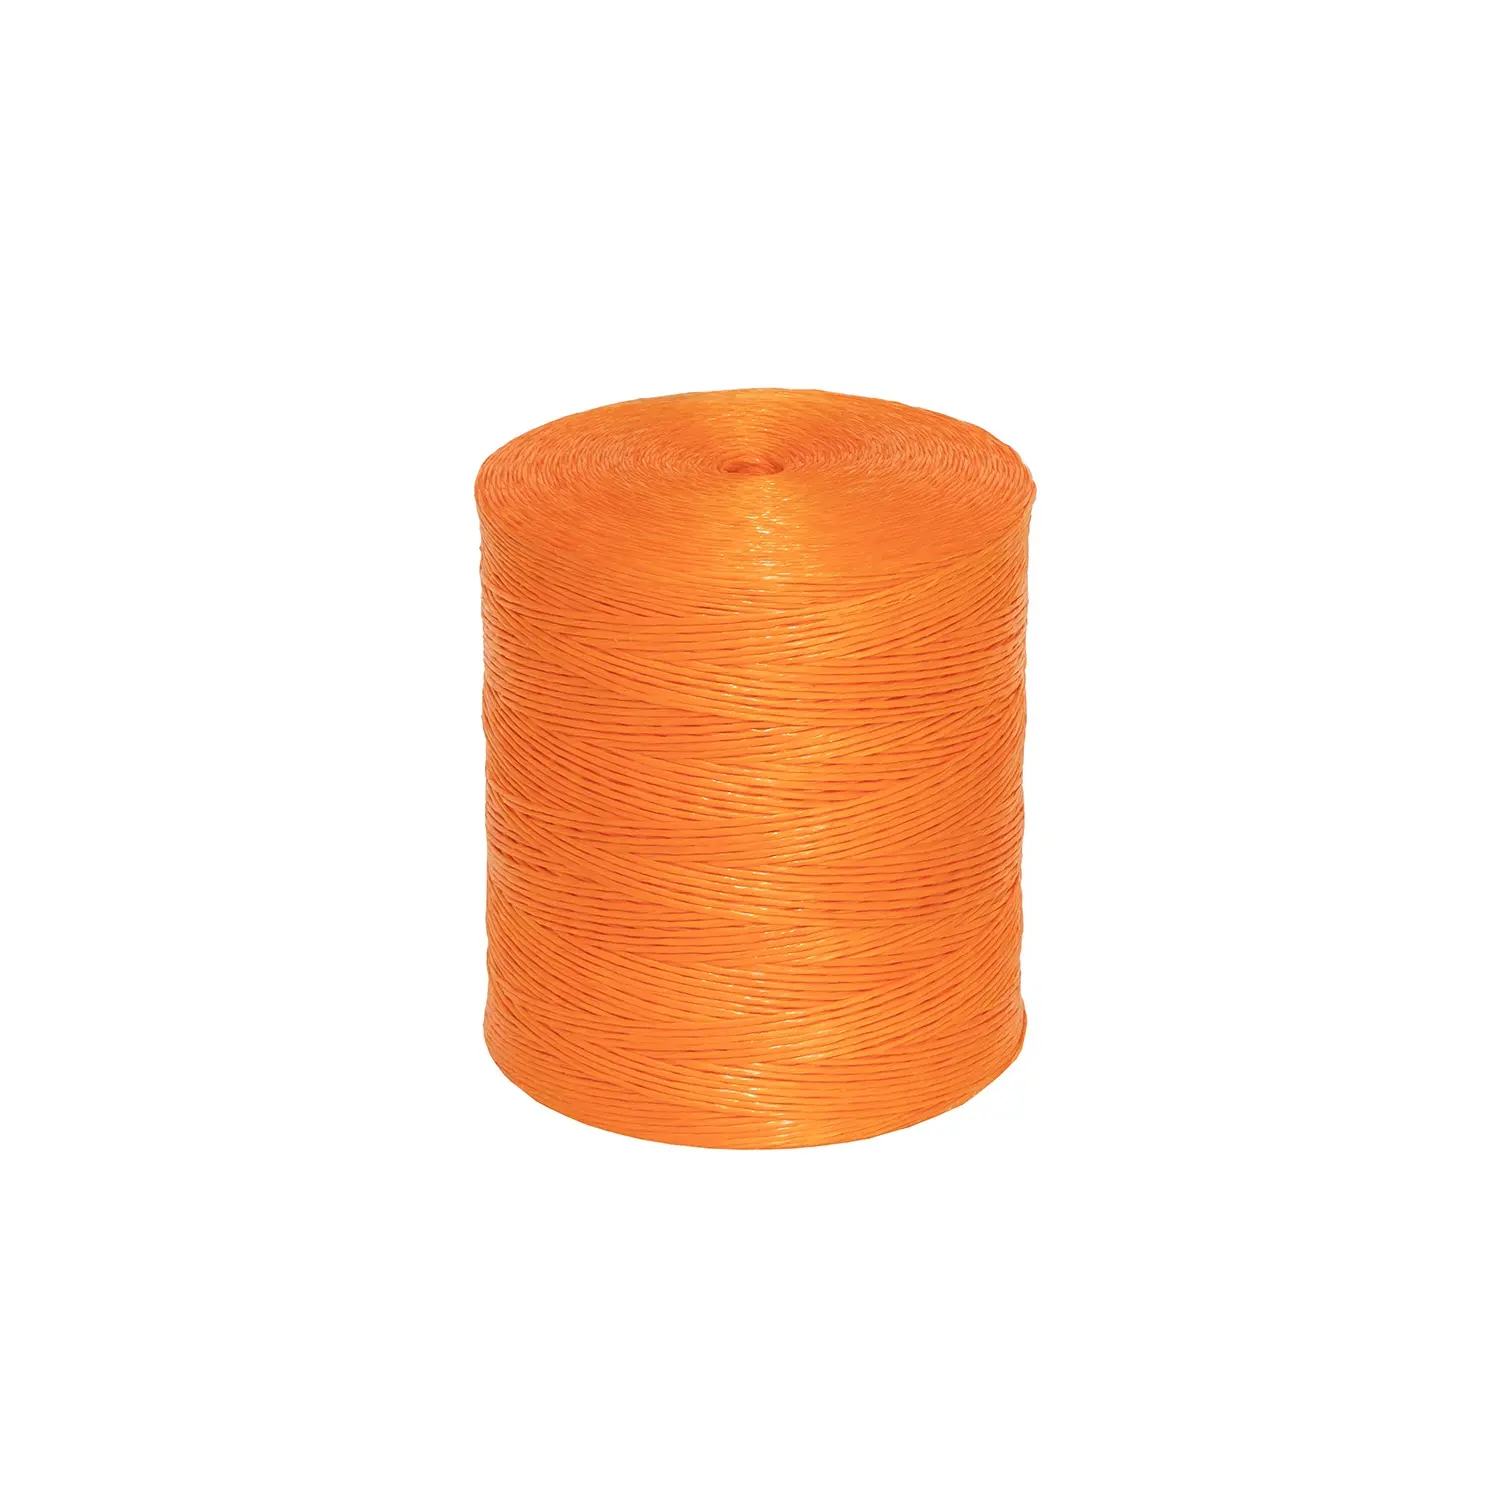 PP virgin material packing baler string agriculture twine tie tomato and banana twine